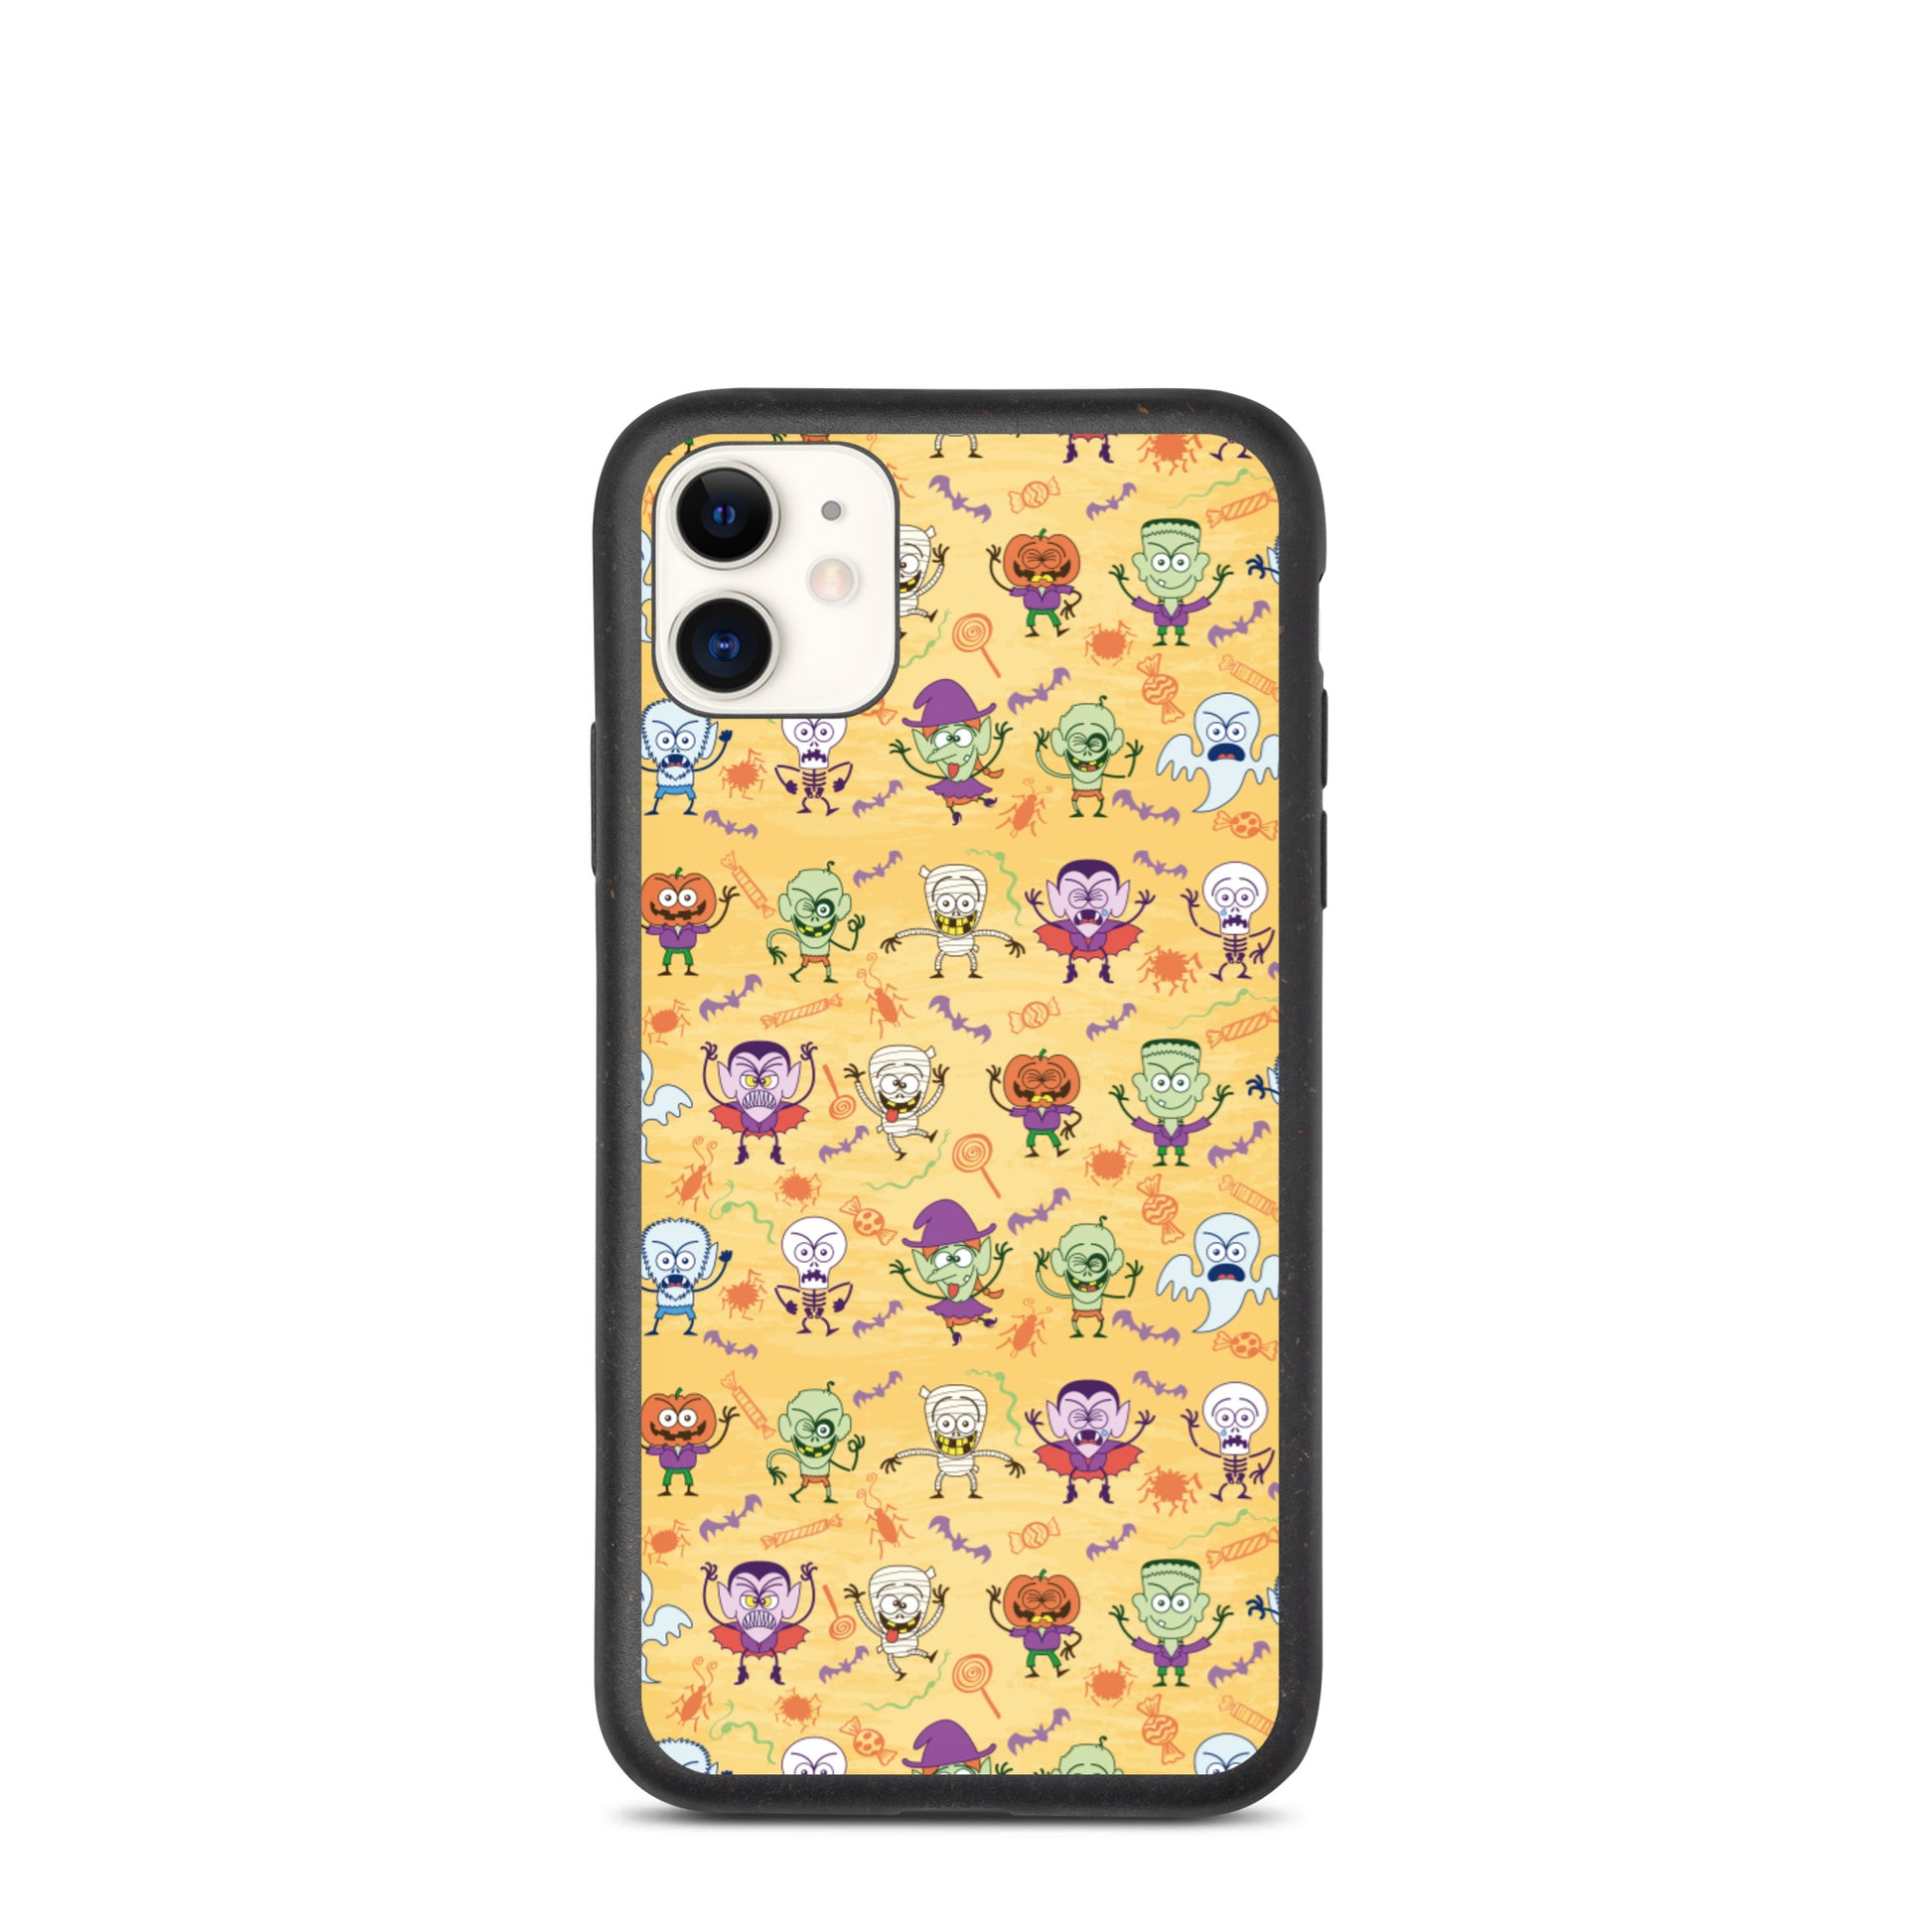 Halloween characters making funny faces Speckled iPhone case. IPhone 11